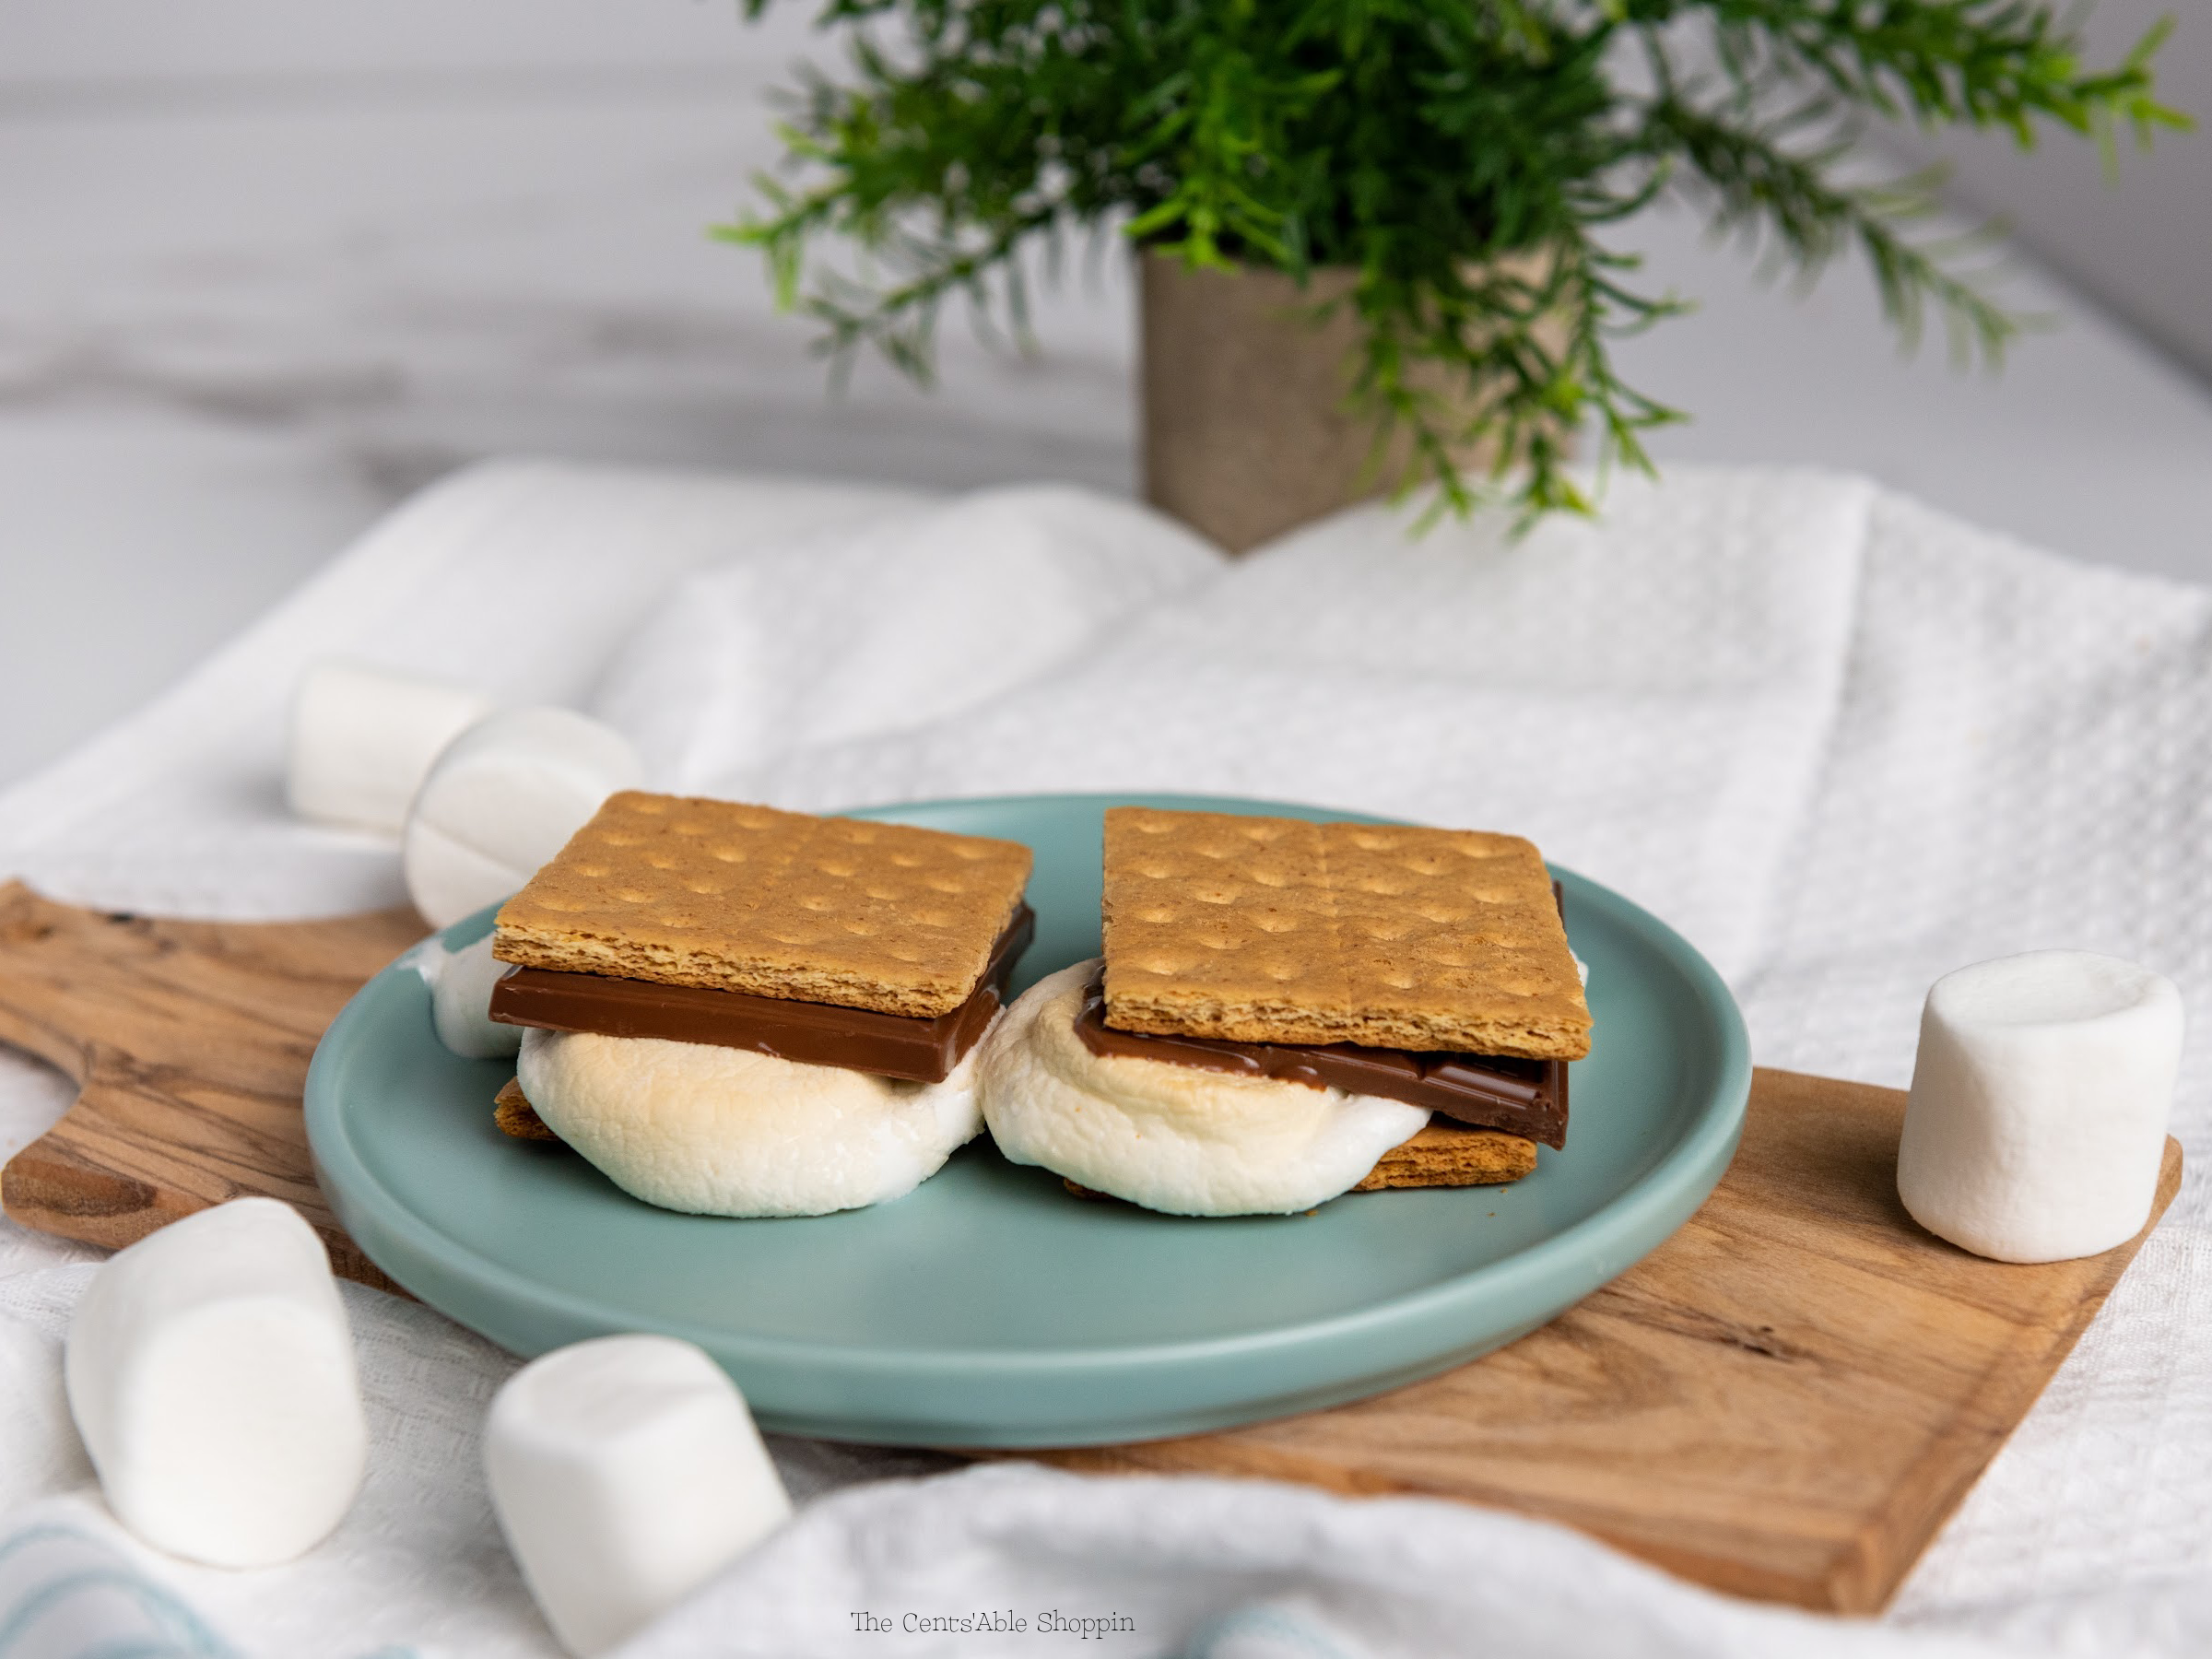 Air Fryer S'Mores